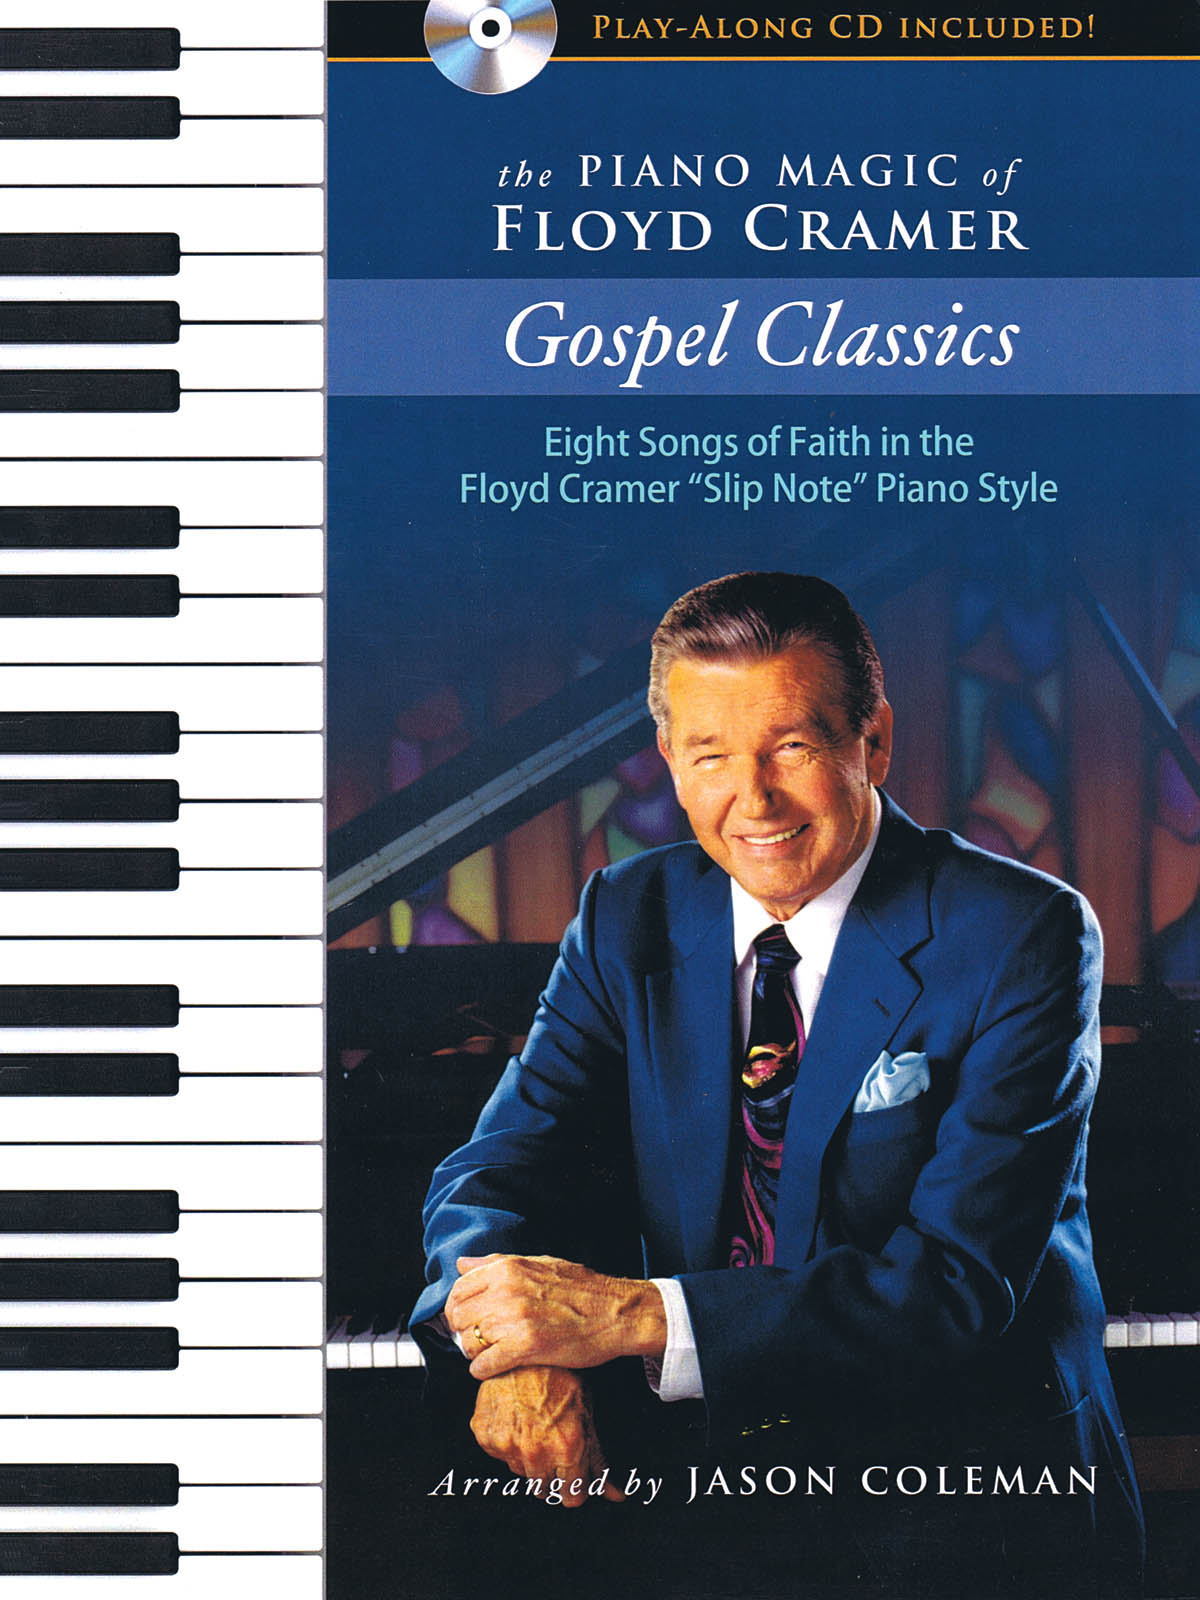 The Piano Magic of Floyd Cramer: Gospel Classics - Eight Songs of Faith in the Floyd Cramer Slip Note Piano Style - filmové melodie na klavír